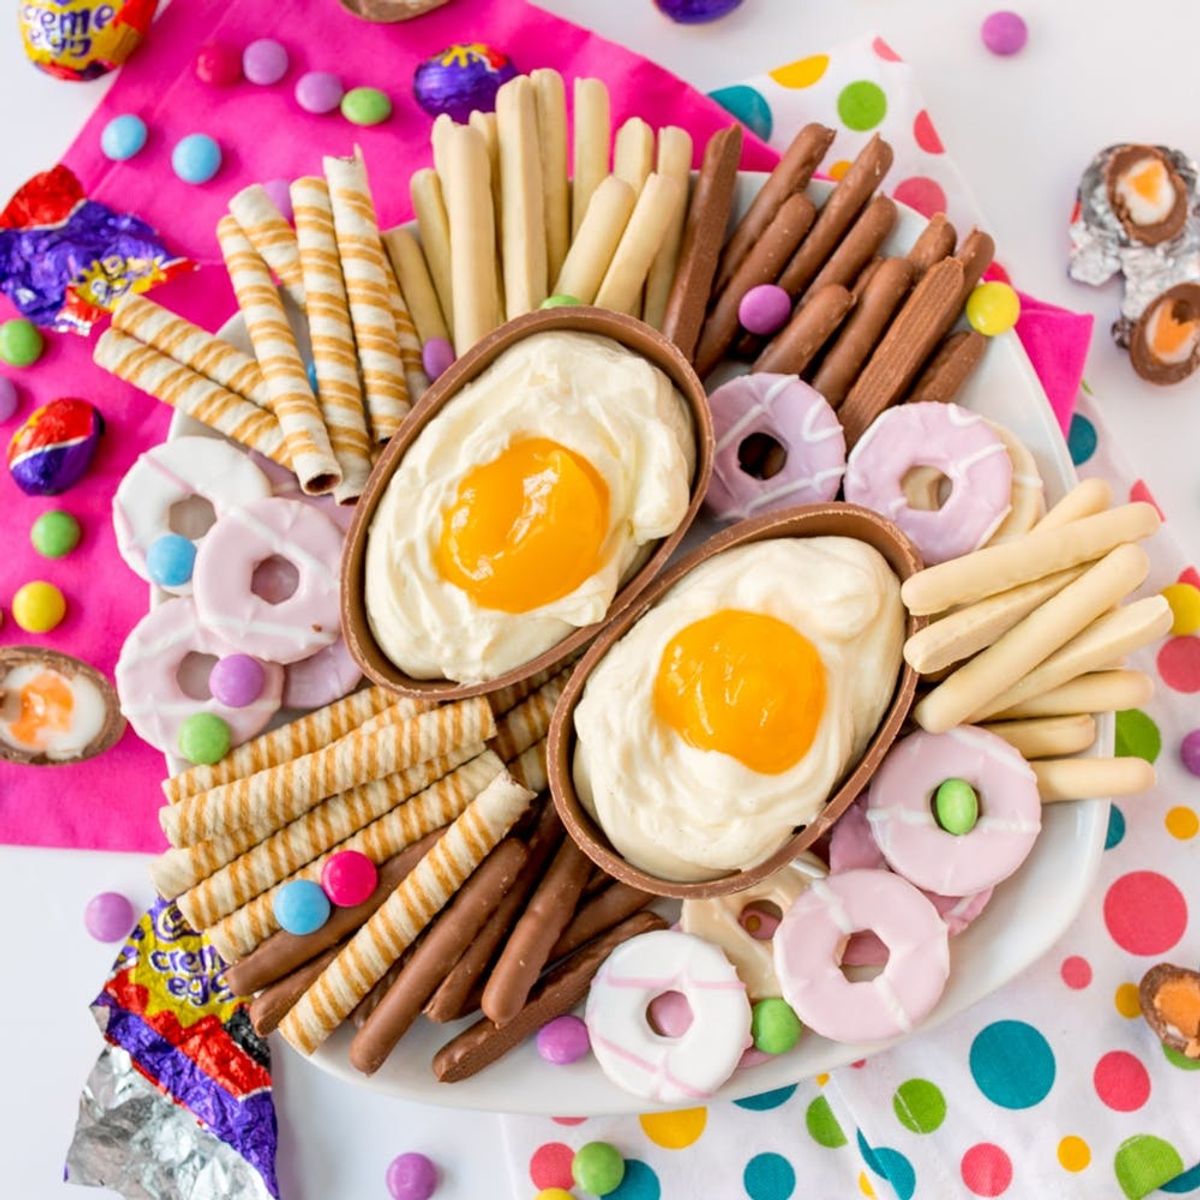 This Giant Cadbury Creme Egg Cheesecake Dip Recipe Is THE Easter Dessert